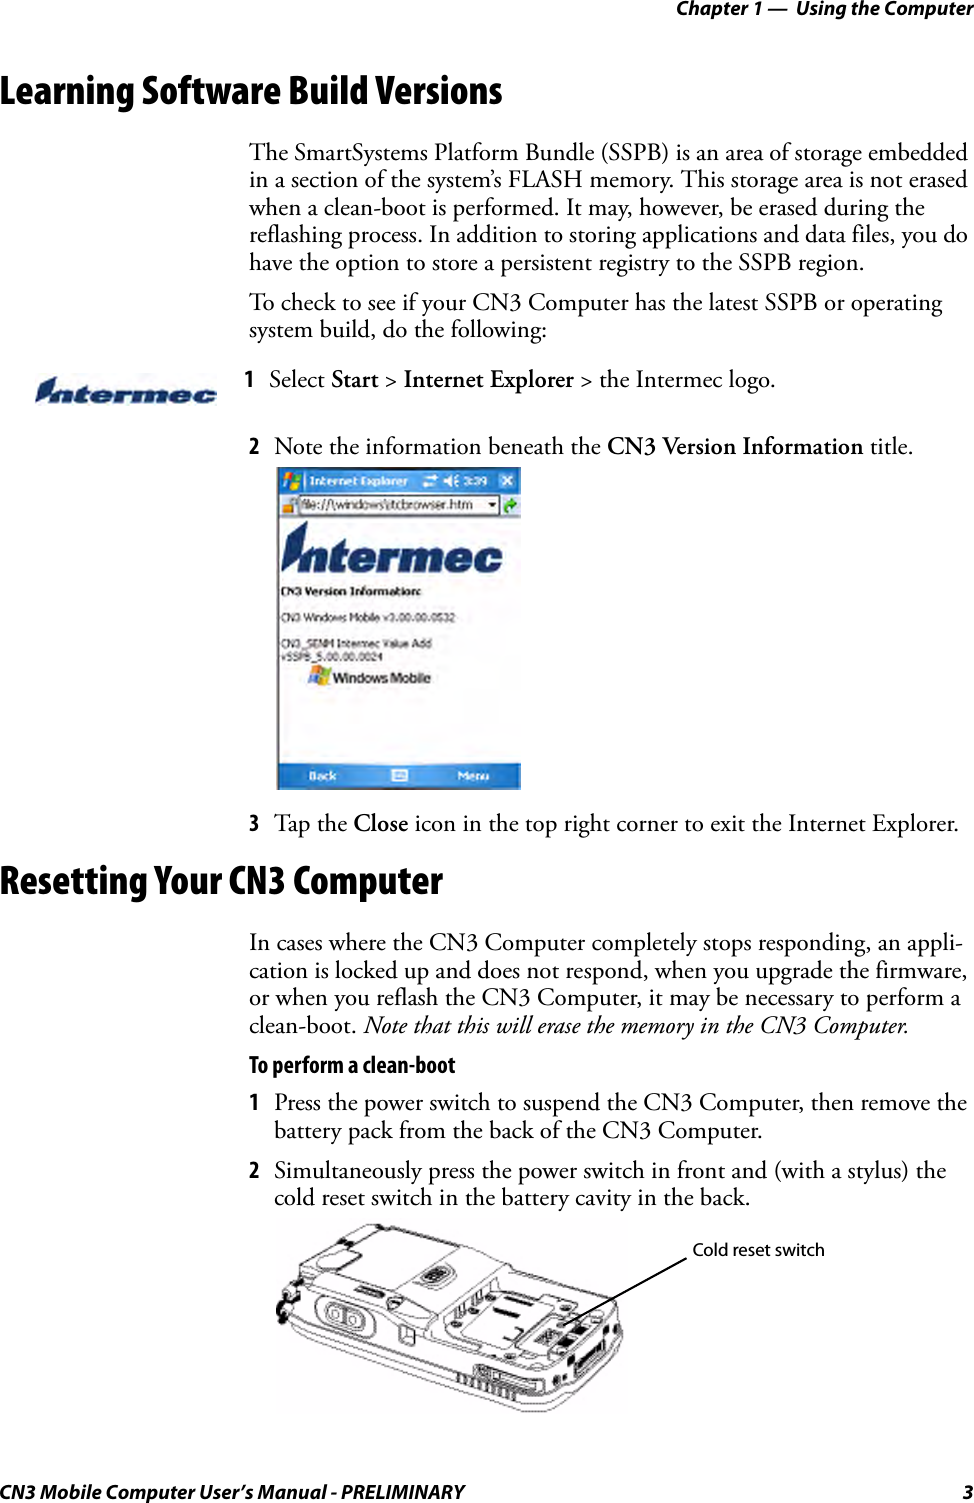 Chapter 1 —  Using the ComputerCN3 Mobile Computer User’s Manual - PRELIMINARY 3Learning Software Build VersionsThe SmartSystems Platform Bundle (SSPB) is an area of storage embedded in a section of the system’s FLASH memory. This storage area is not erased when a clean-boot is performed. It may, however, be erased during the reflashing process. In addition to storing applications and data files, you do have the option to store a persistent registry to the SSPB region.To check to see if your CN3 Computer has the latest SSPB or operating system build, do the following:2Note the information beneath the CN3 Version Information title.3Tap the Close icon in the top right corner to exit the Internet Explorer.Resetting Your CN3 ComputerIn cases where the CN3 Computer completely stops responding, an appli-cation is locked up and does not respond, when you upgrade the firmware, or when you reflash the CN3 Computer, it may be necessary to perform a clean-boot. Note that this will erase the memory in the CN3 Computer.To perform a clean-boot1Press the power switch to suspend the CN3 Computer, then remove the battery pack from the back of the CN3 Computer.2Simultaneously press the power switch in front and (with a stylus) the cold reset switch in the battery cavity in the back.1Select Start &gt; Internet Explorer &gt; the Intermec logo.Cold reset switch